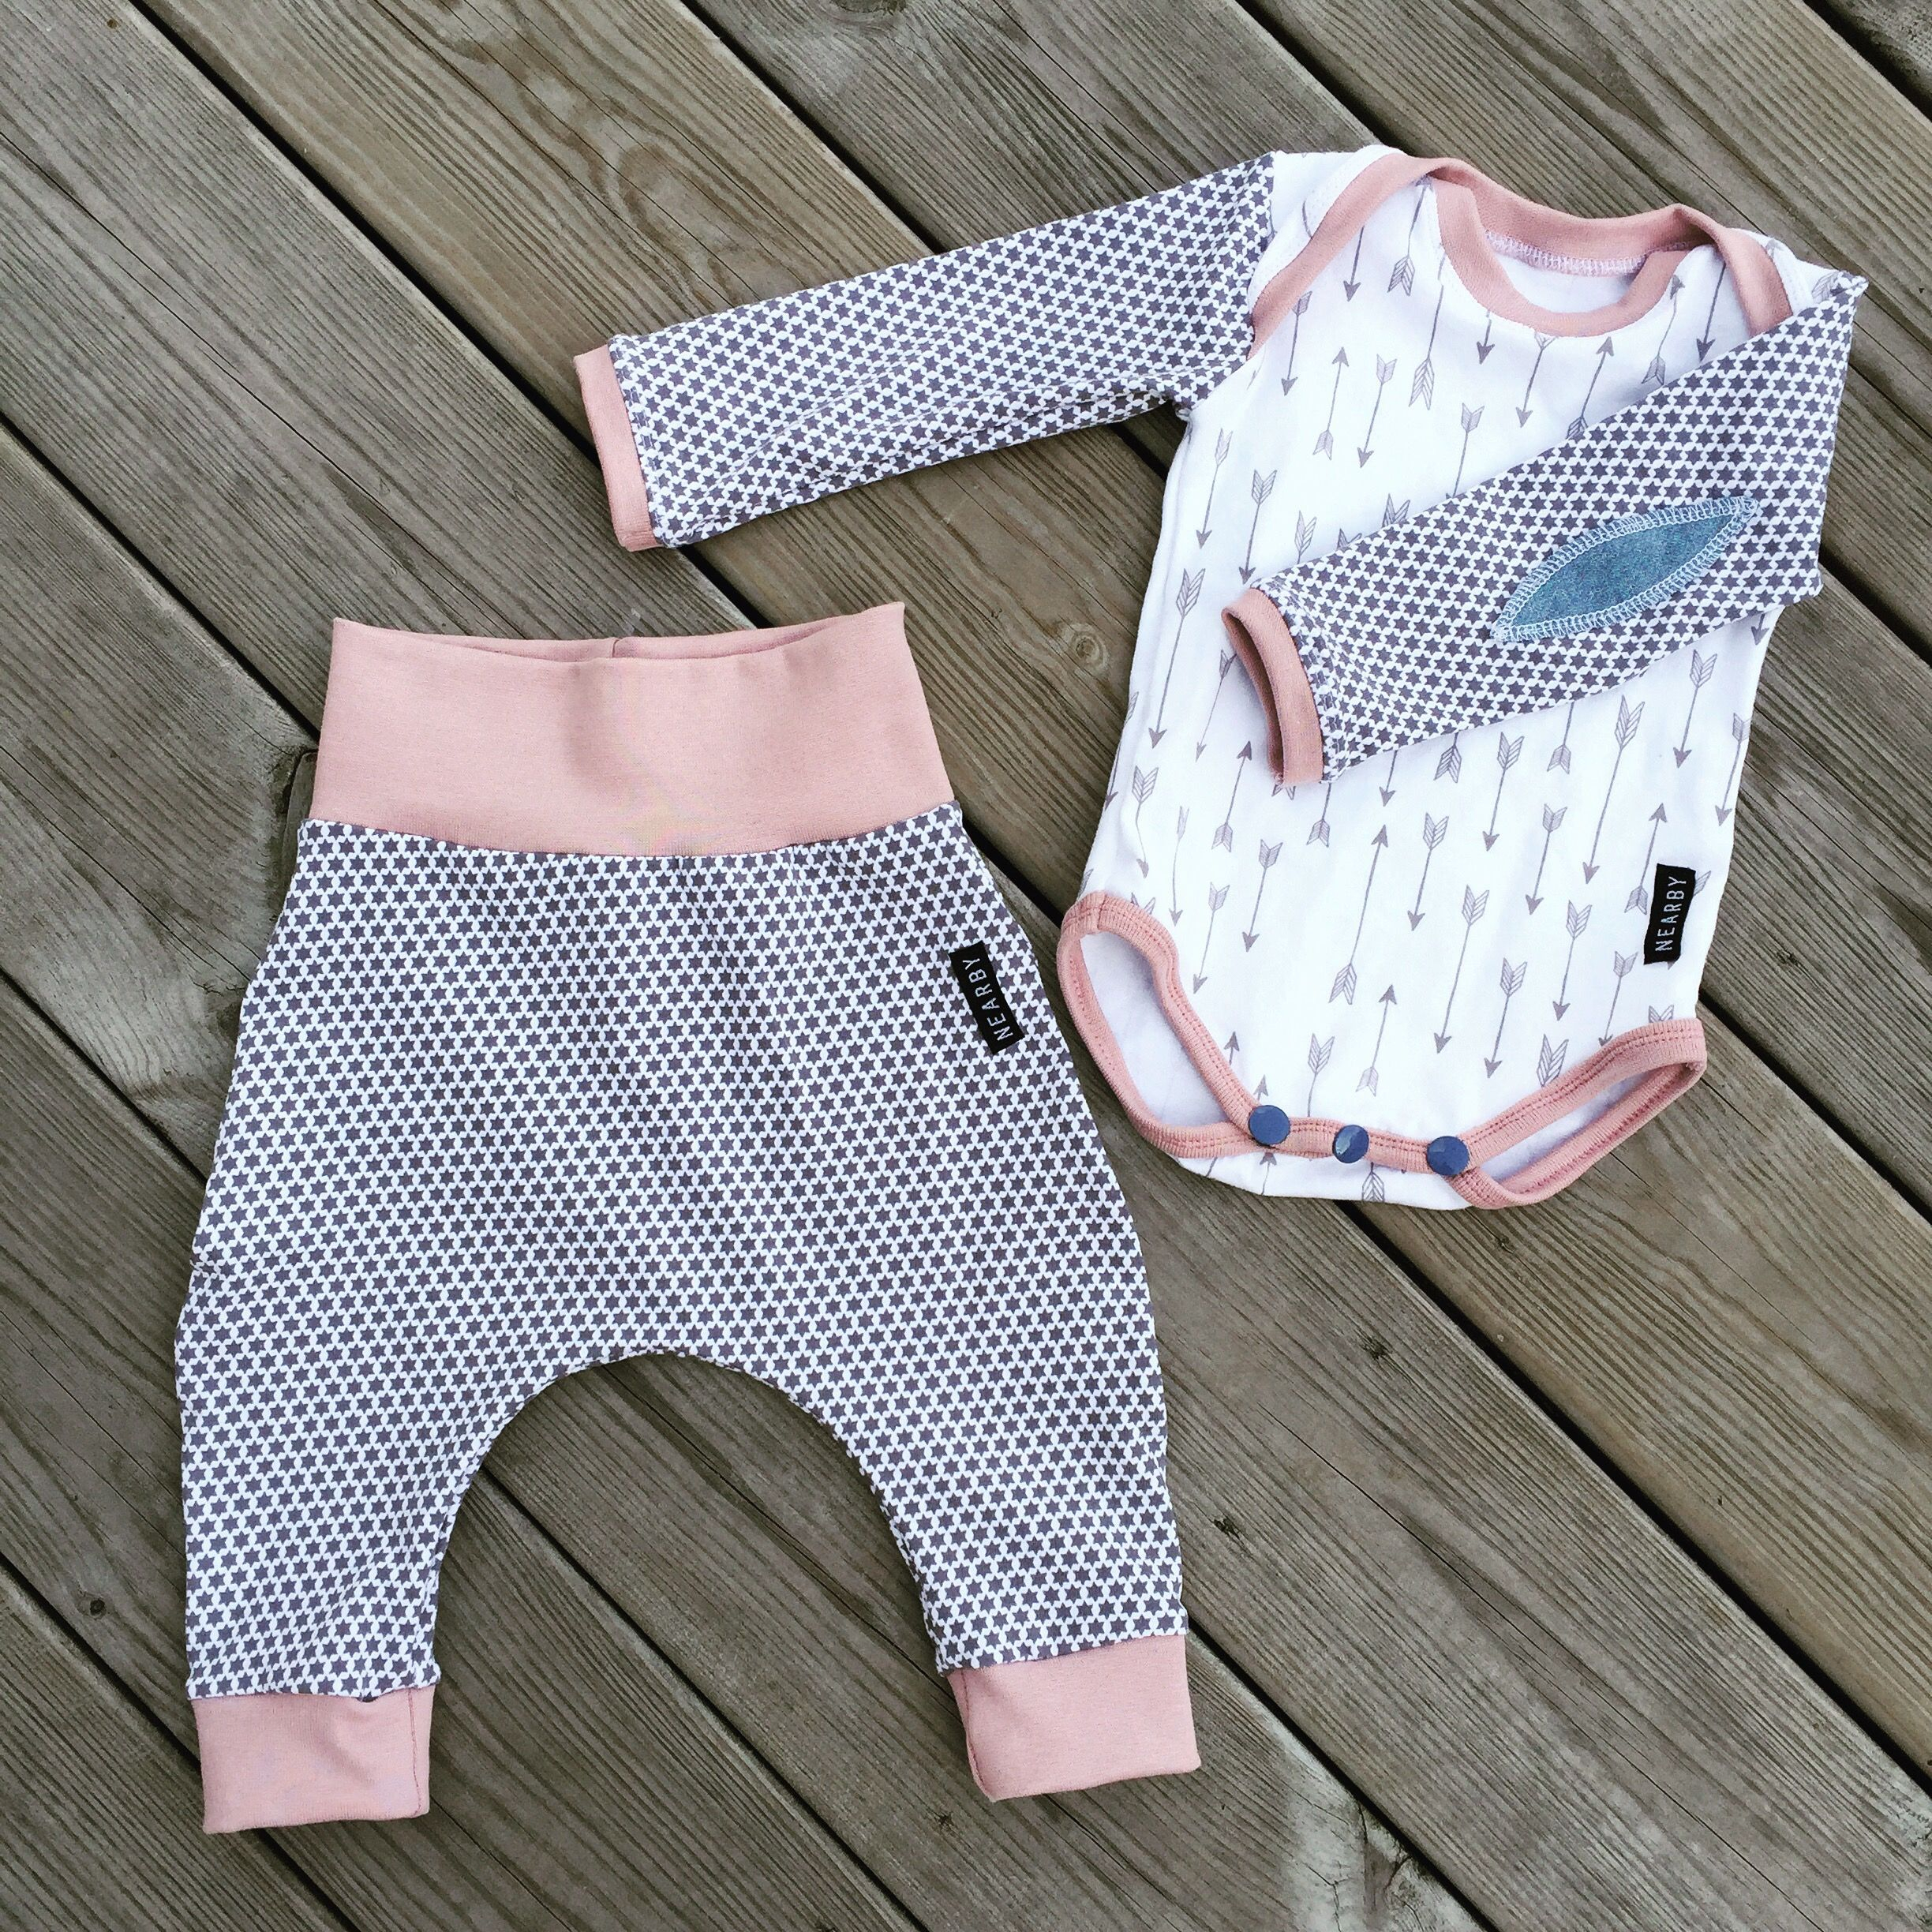 Sewing Patterns For Babies Love This Free Pattern This Ba Onepiece Is So Fun To Sew You